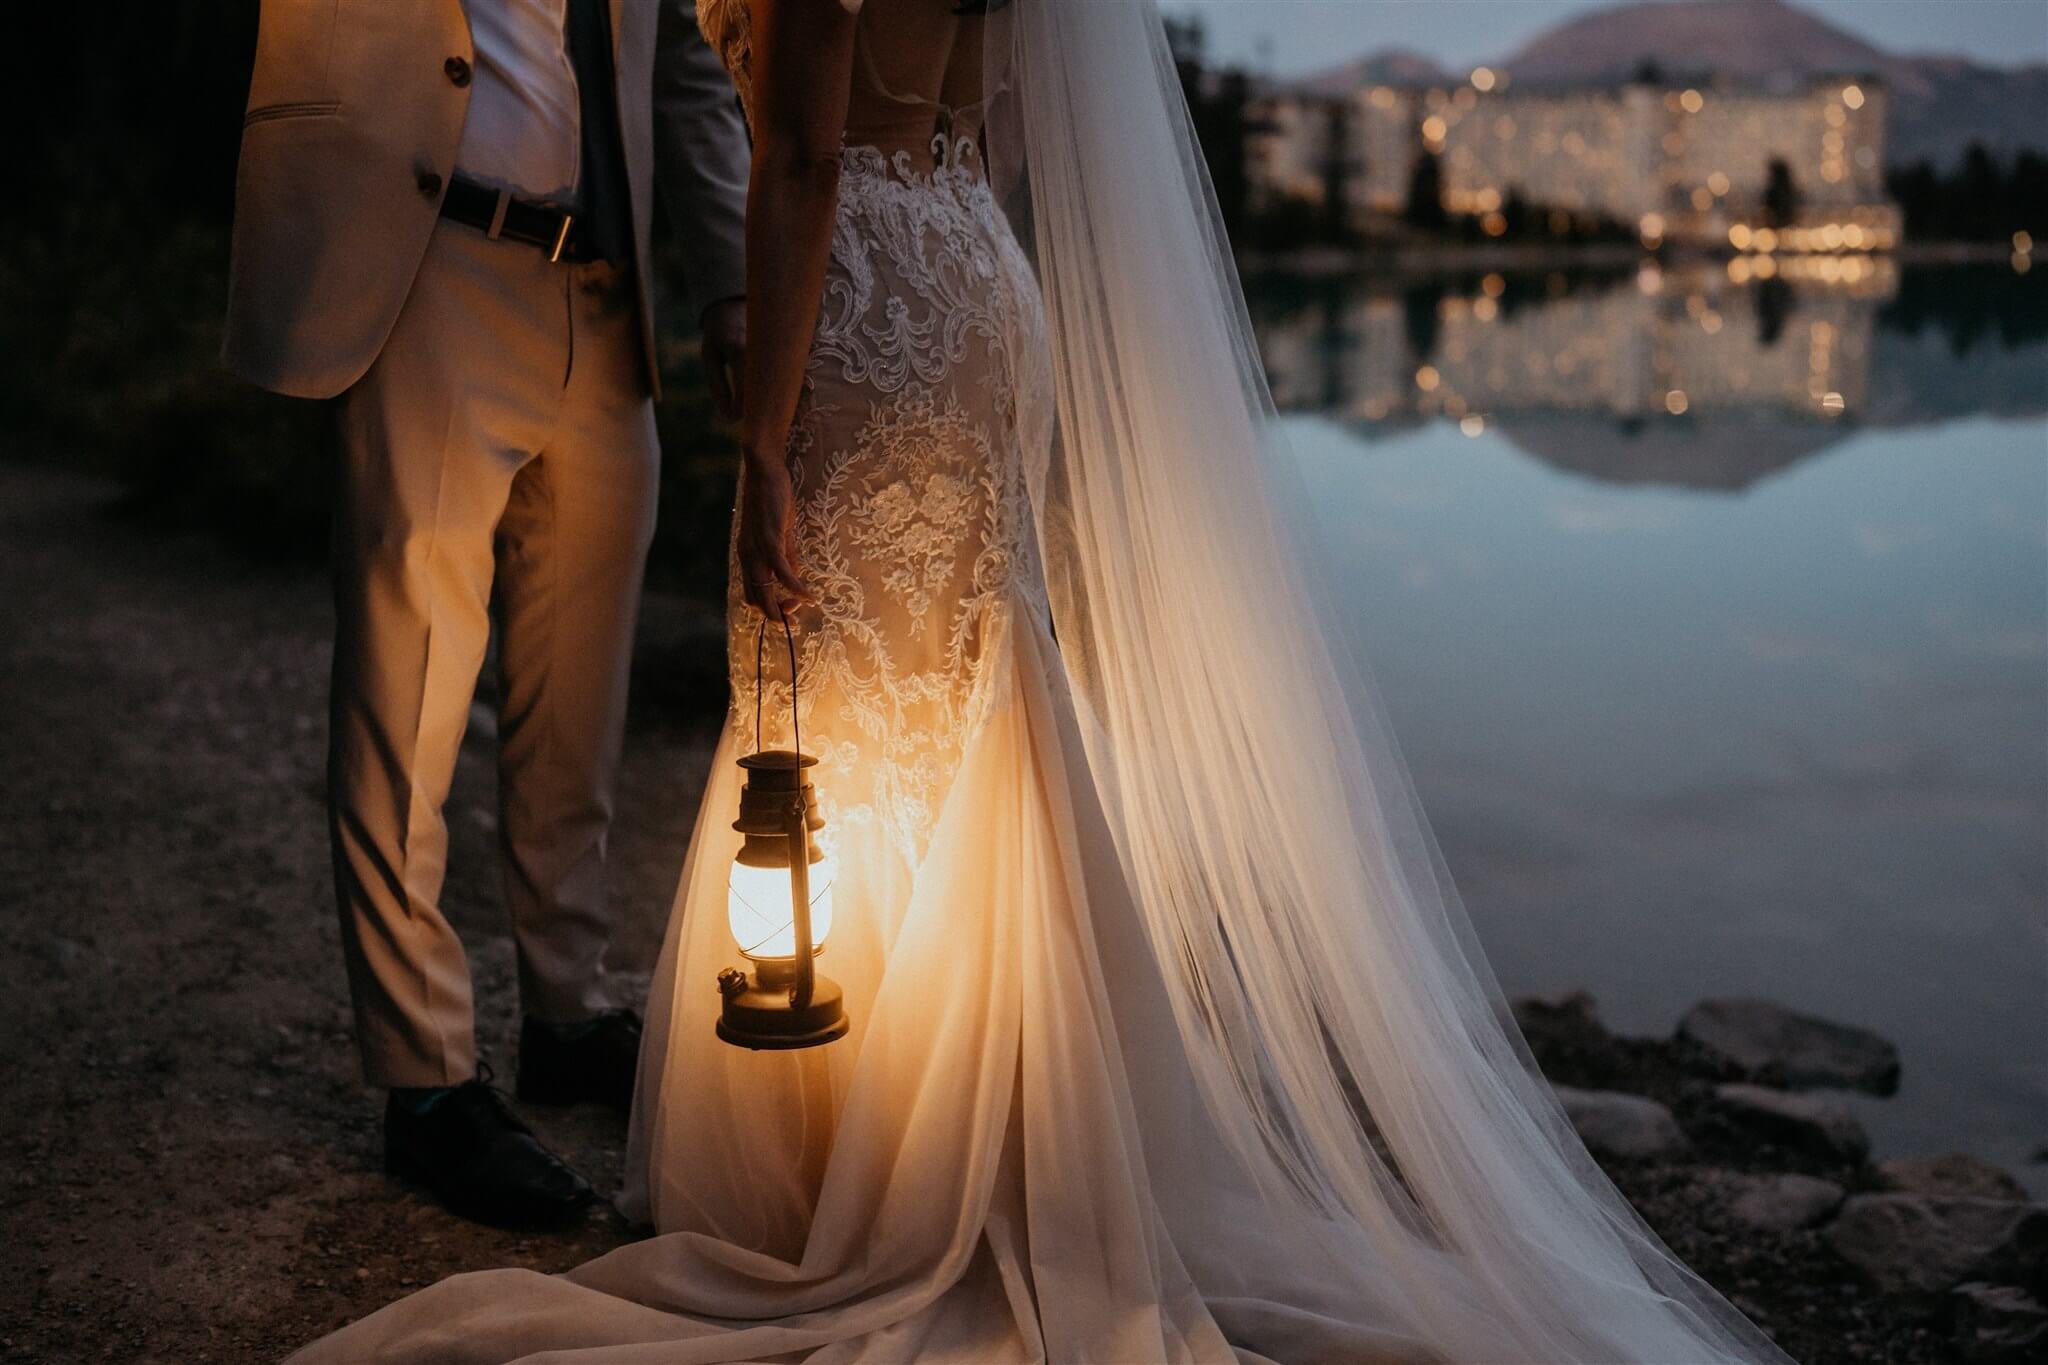 Bride and groom holding lanterns by Lake Louise at their luxury wedding at Fairmont Chateau Lake Louise hotel